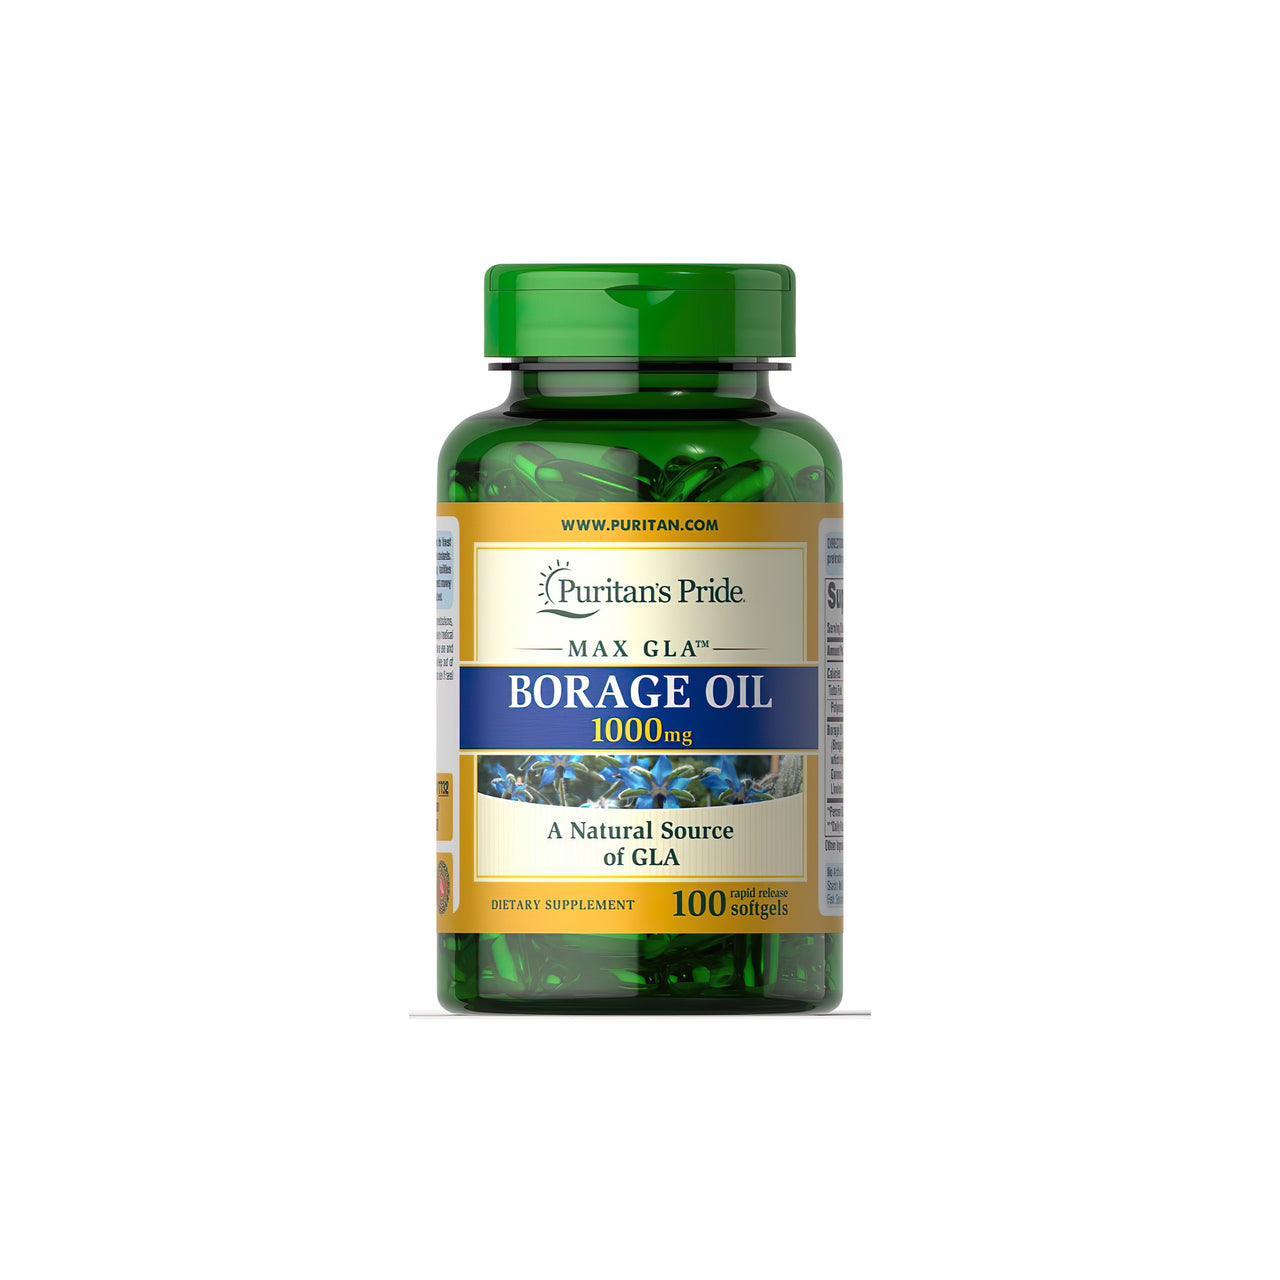 A dietary supplement bottle containing Puritan's Pride Borage Oil 1000 mg.